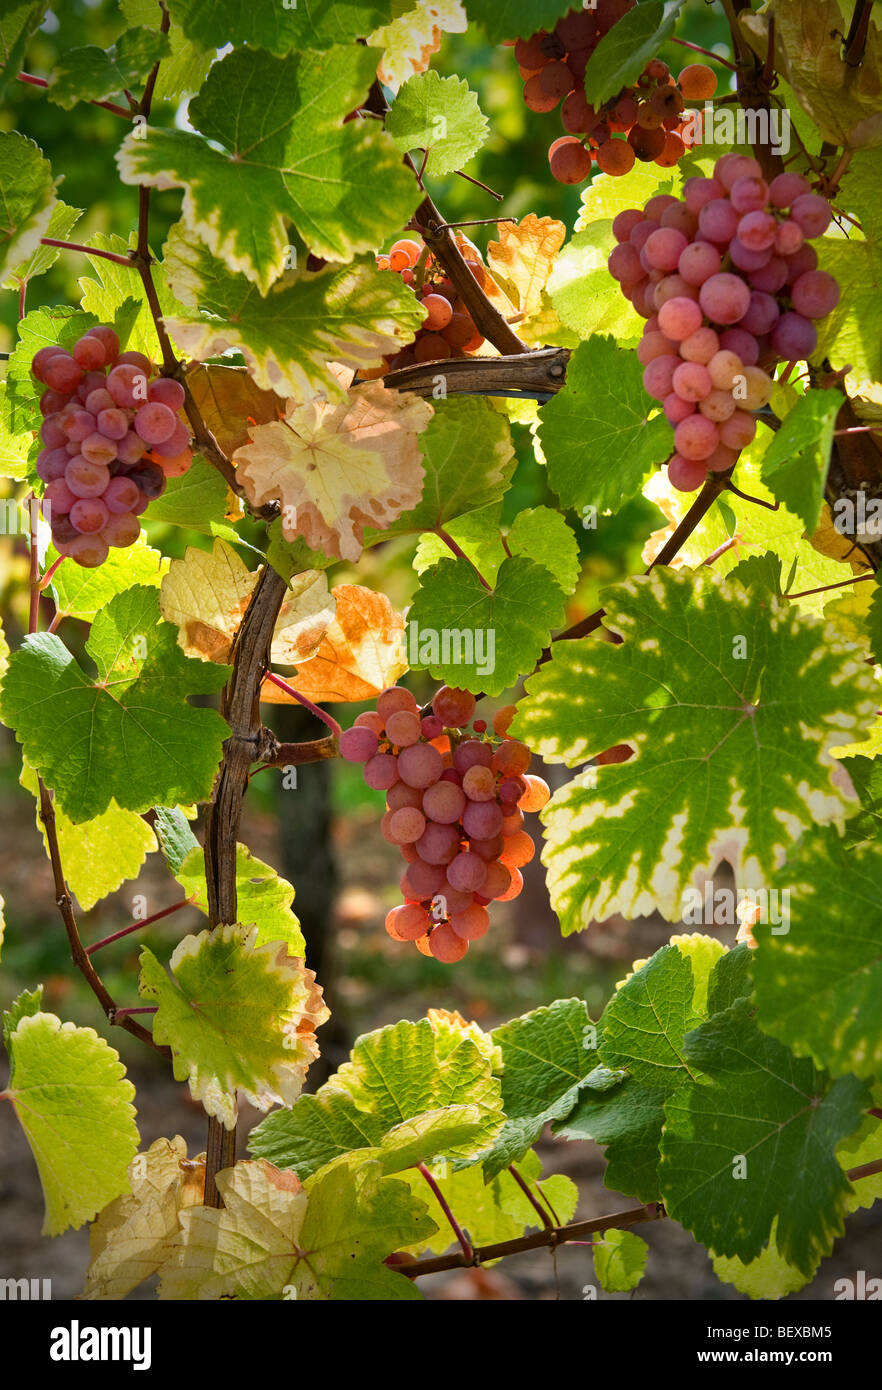 Ripe Gewurztraminer grapes in the Domaines Dopff vineyard near Riquewihr in late autumnal sunshine Alsace France Stock Photo